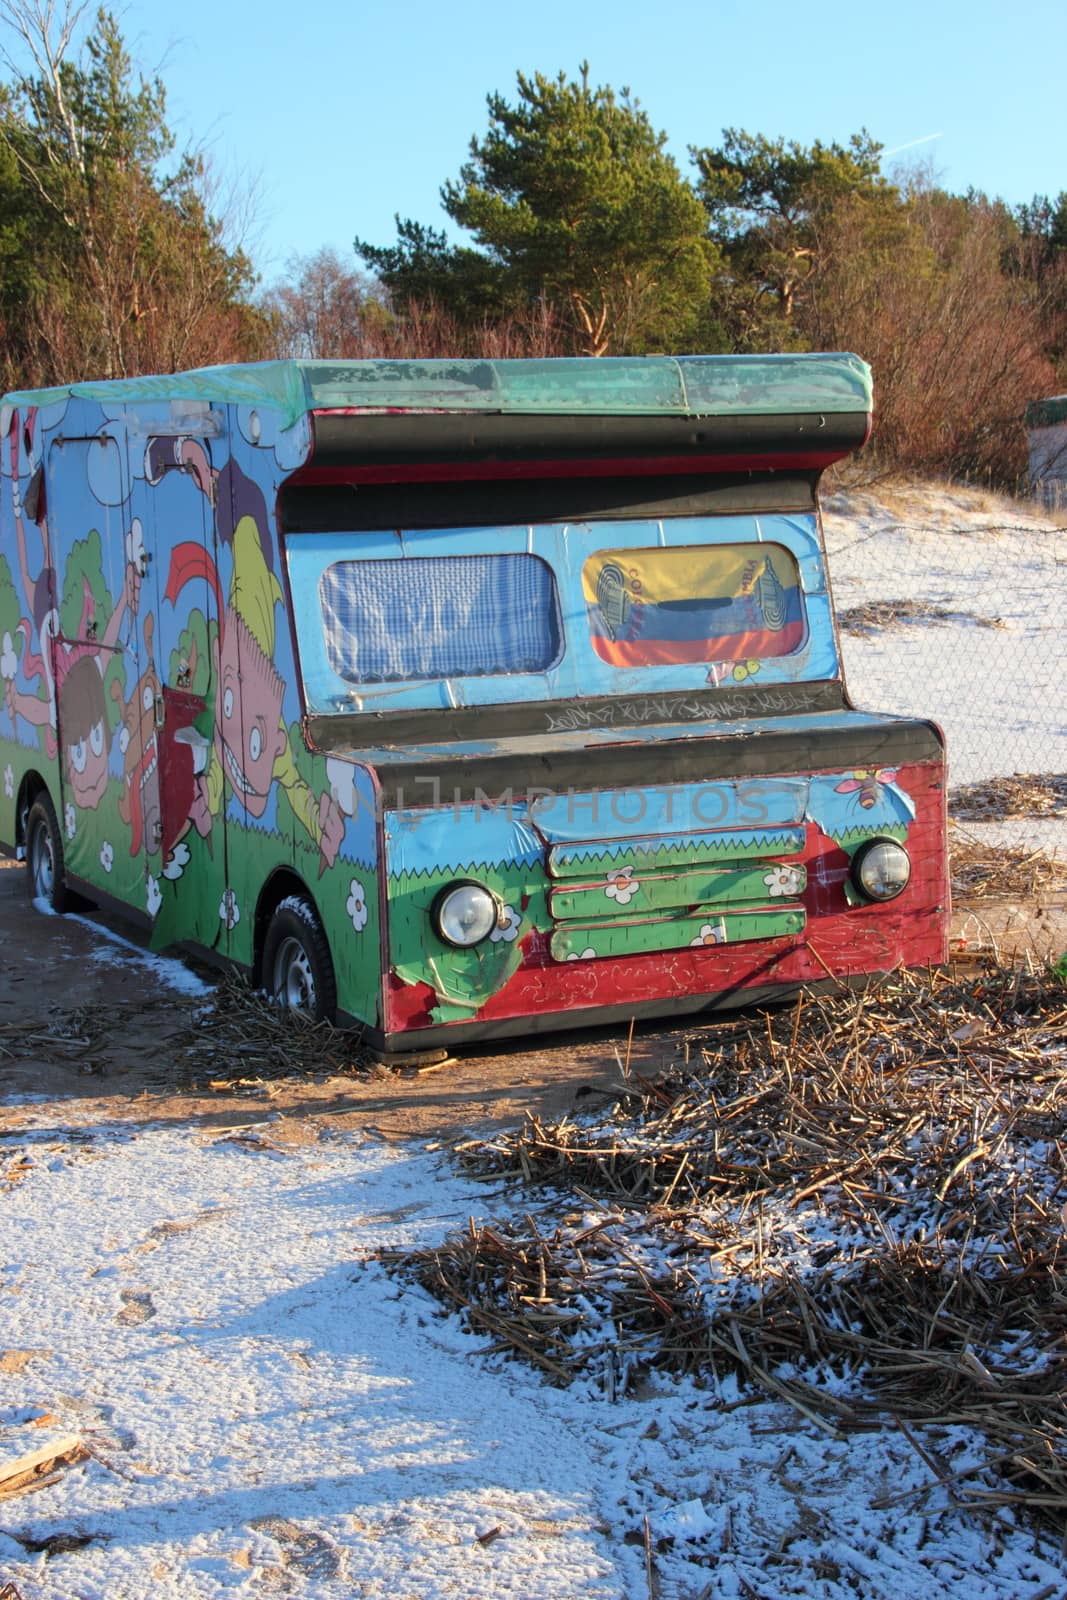 painted car freezer standing on the beach